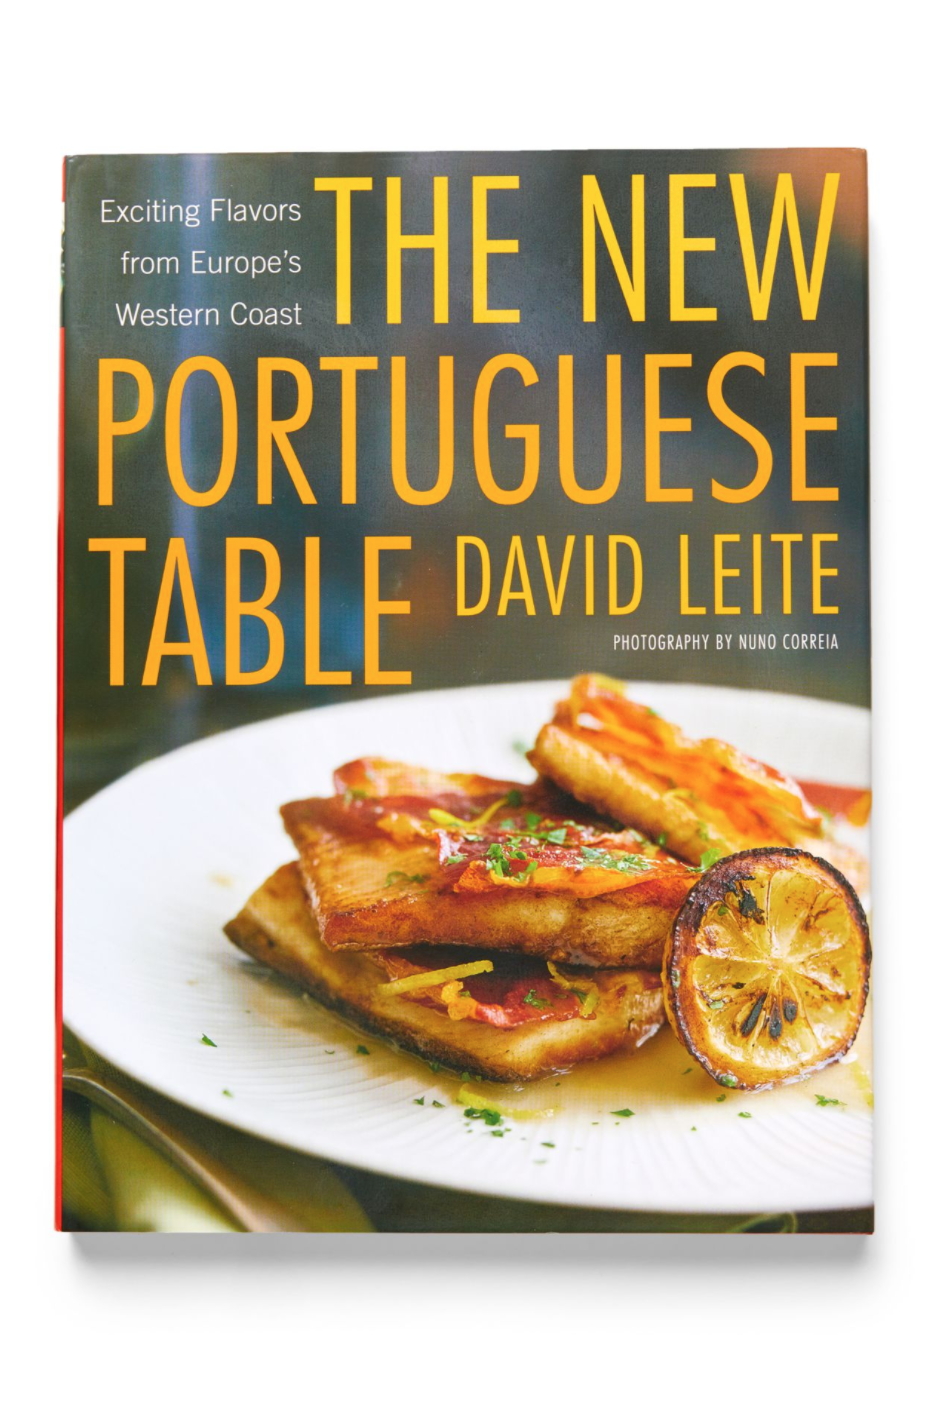 'The New Portuguese Table' by David Leite